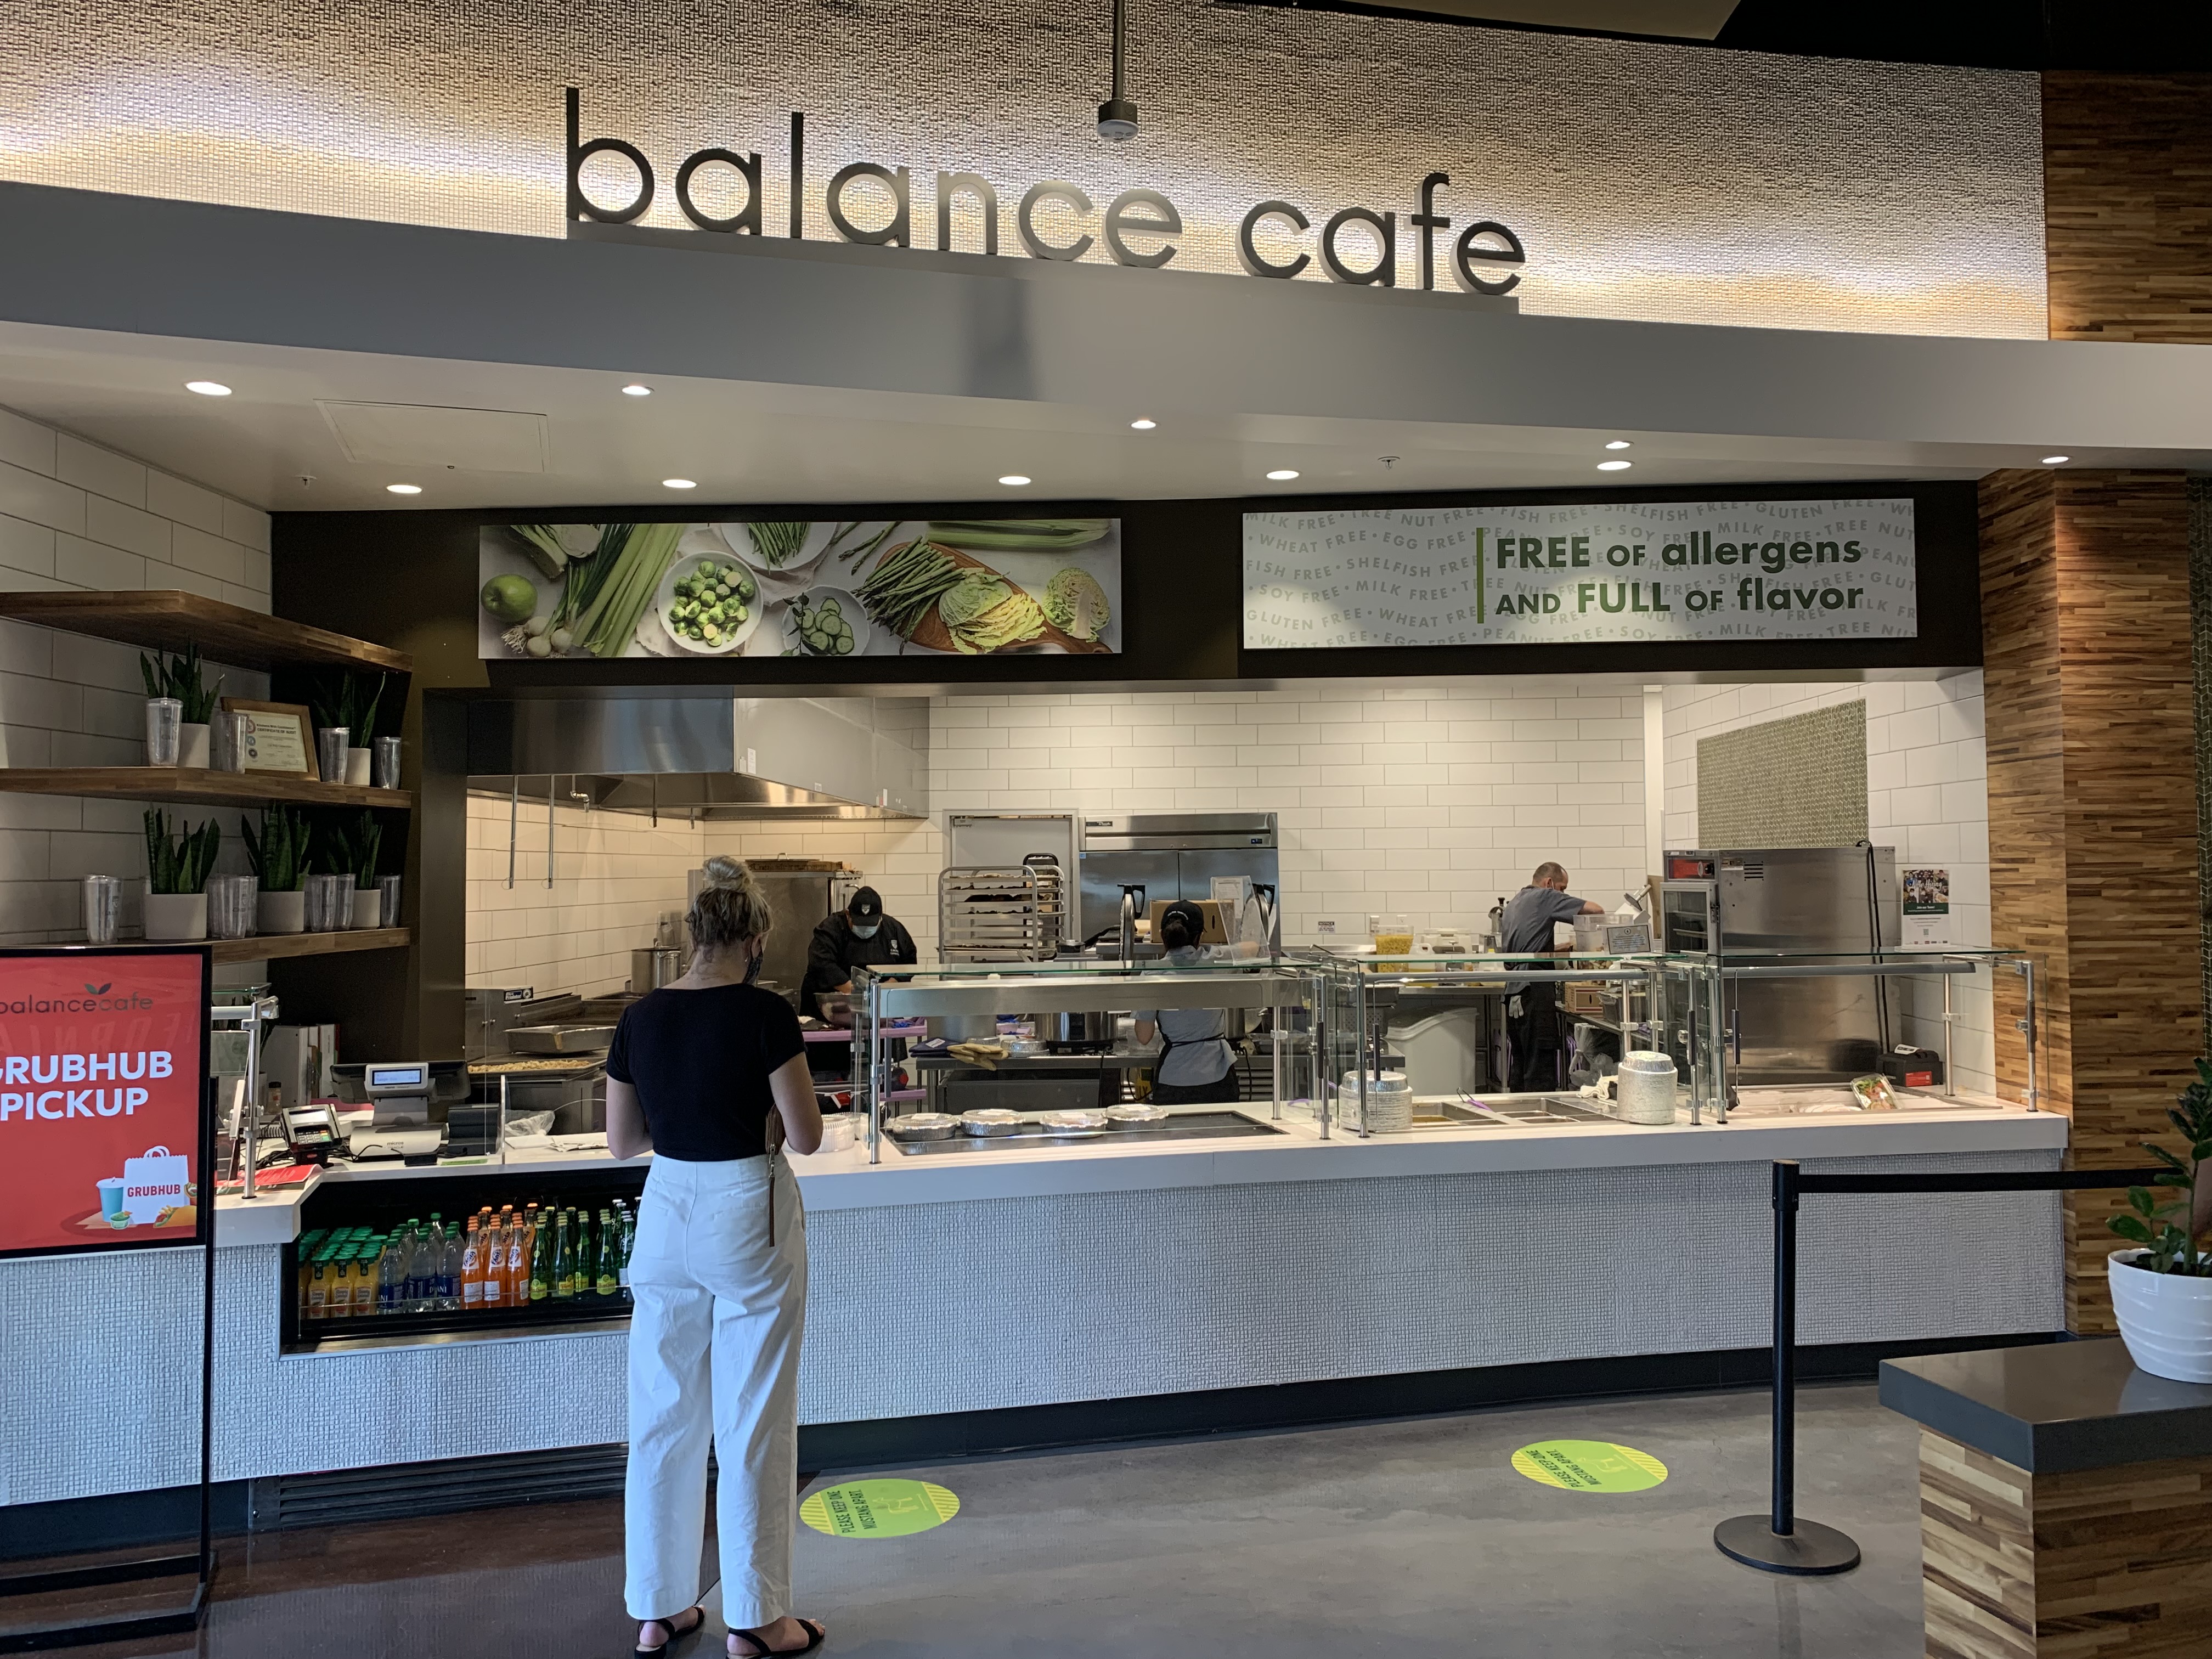 Cal Poly Dining on X: Visit Balance Cafe in Vista Grande for delicious,  allergen-free food options! Pro tip: order ahead with Grubhub 😋  #WednesdayWellness #CalPoly #choosewell #Grubhub  /  X